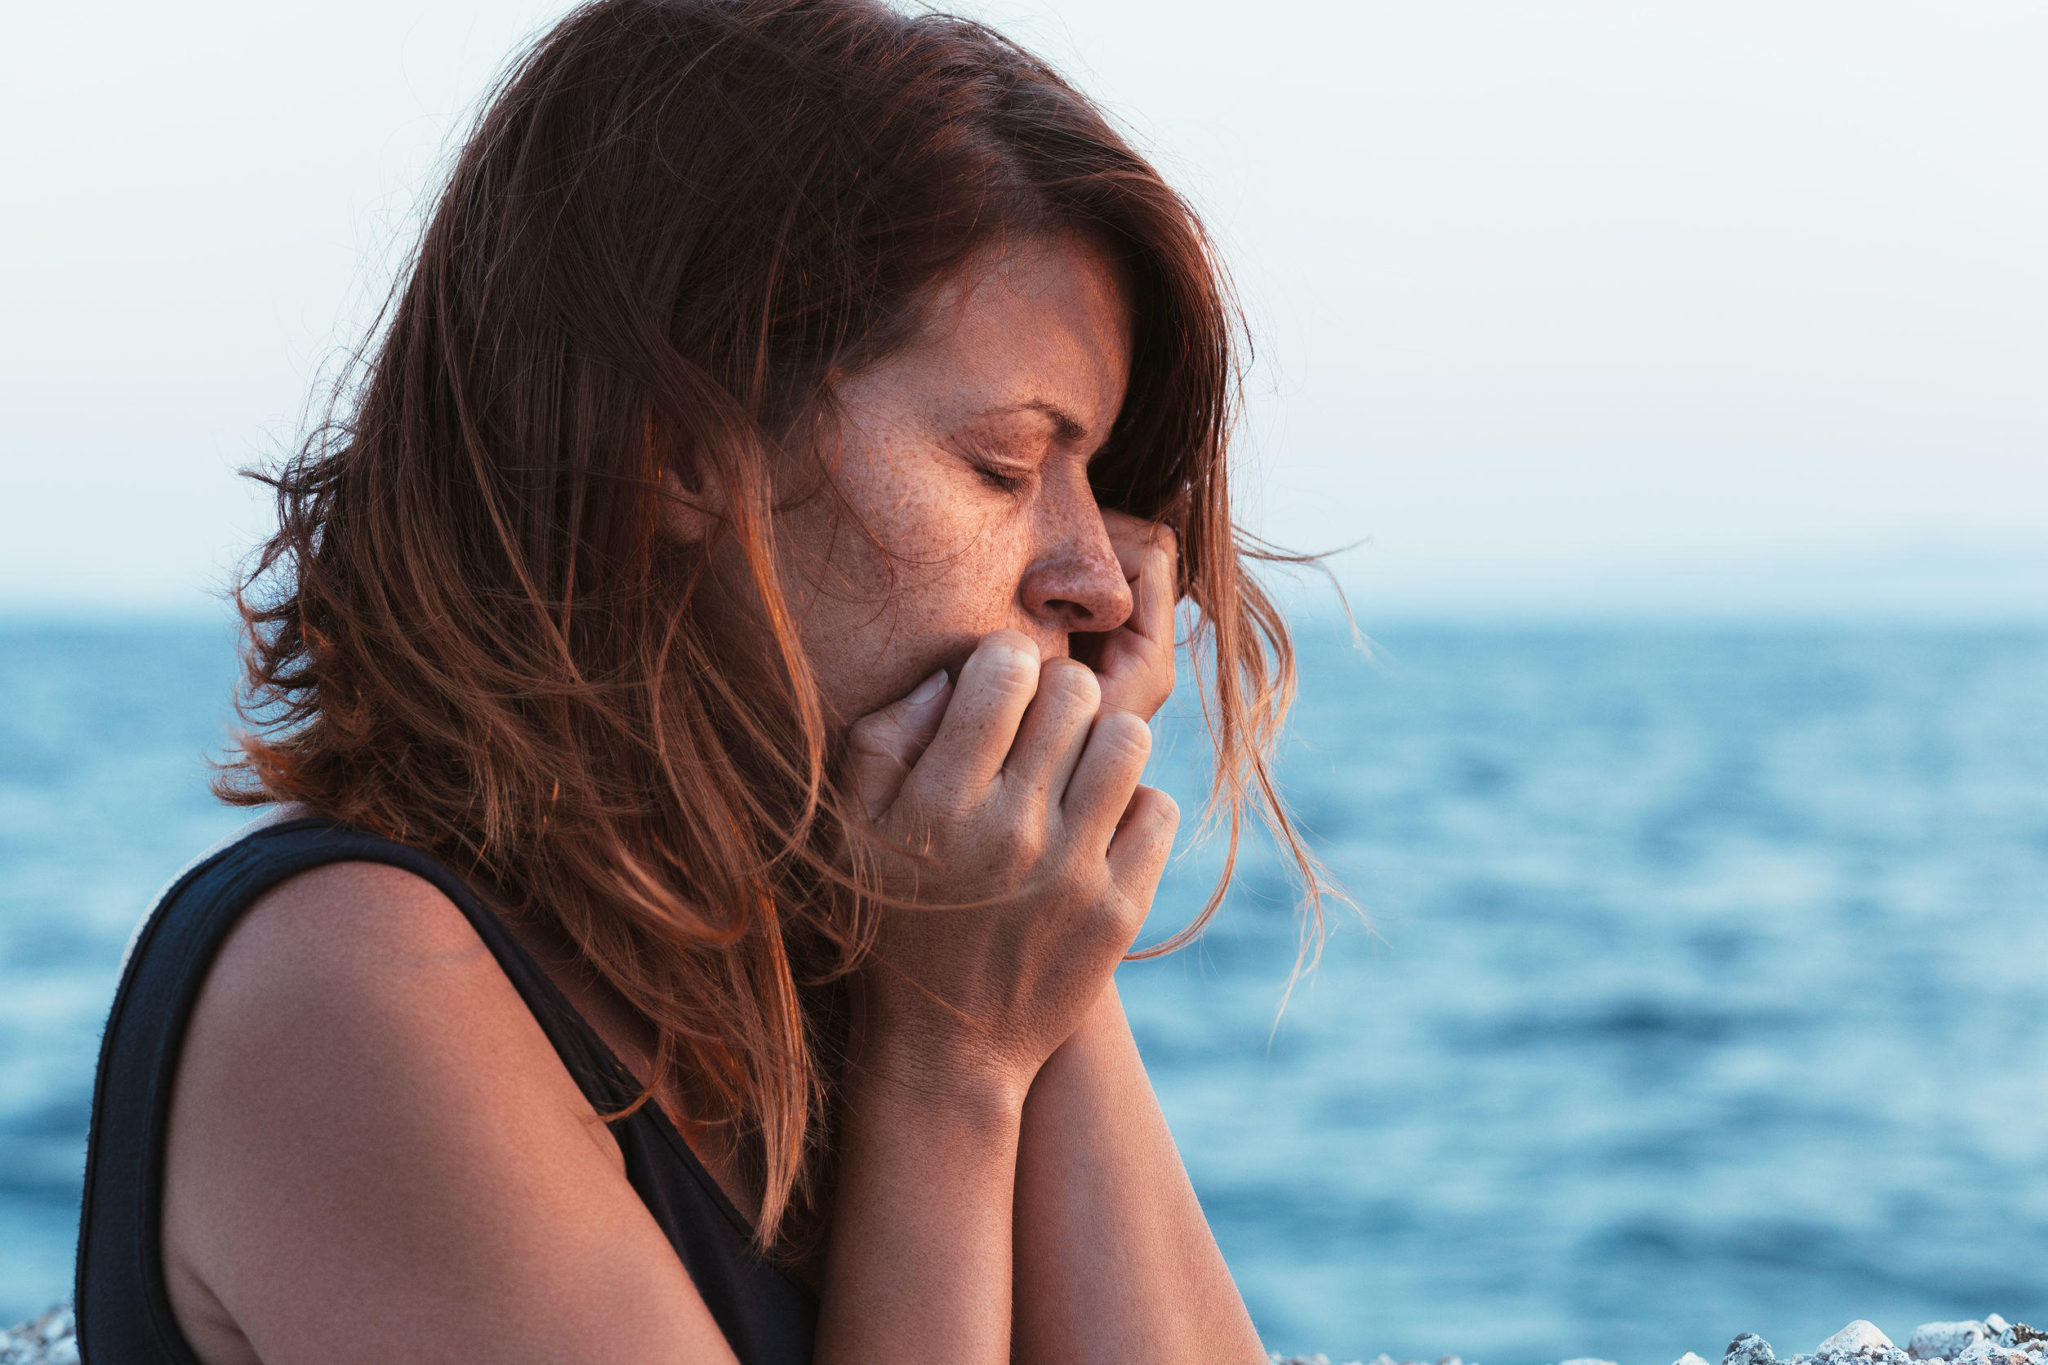 85451943 – young woman feeling sad by the sea